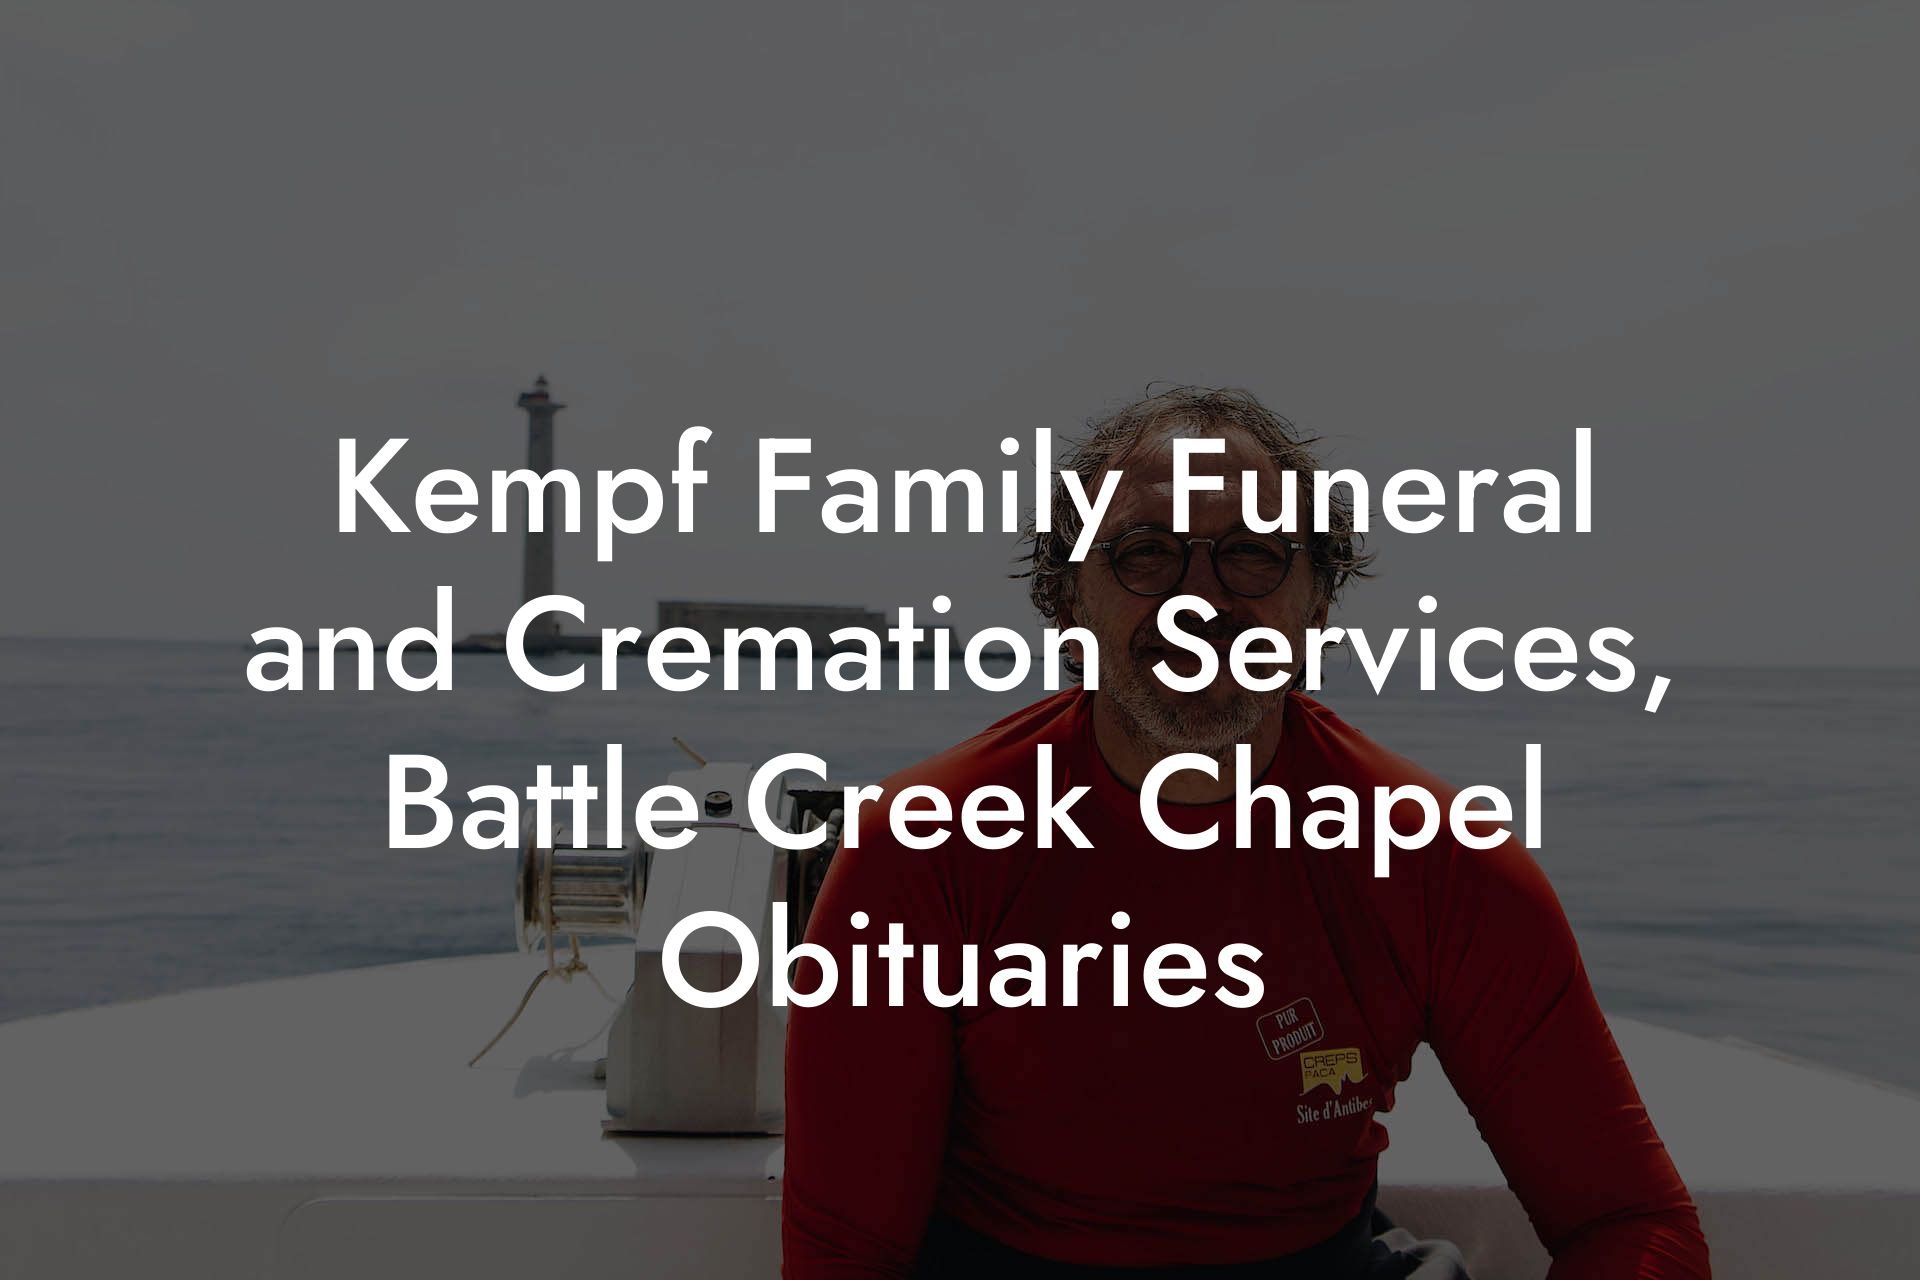 Kempf Family Funeral and Cremation Services, Battle Creek Chapel Obituaries